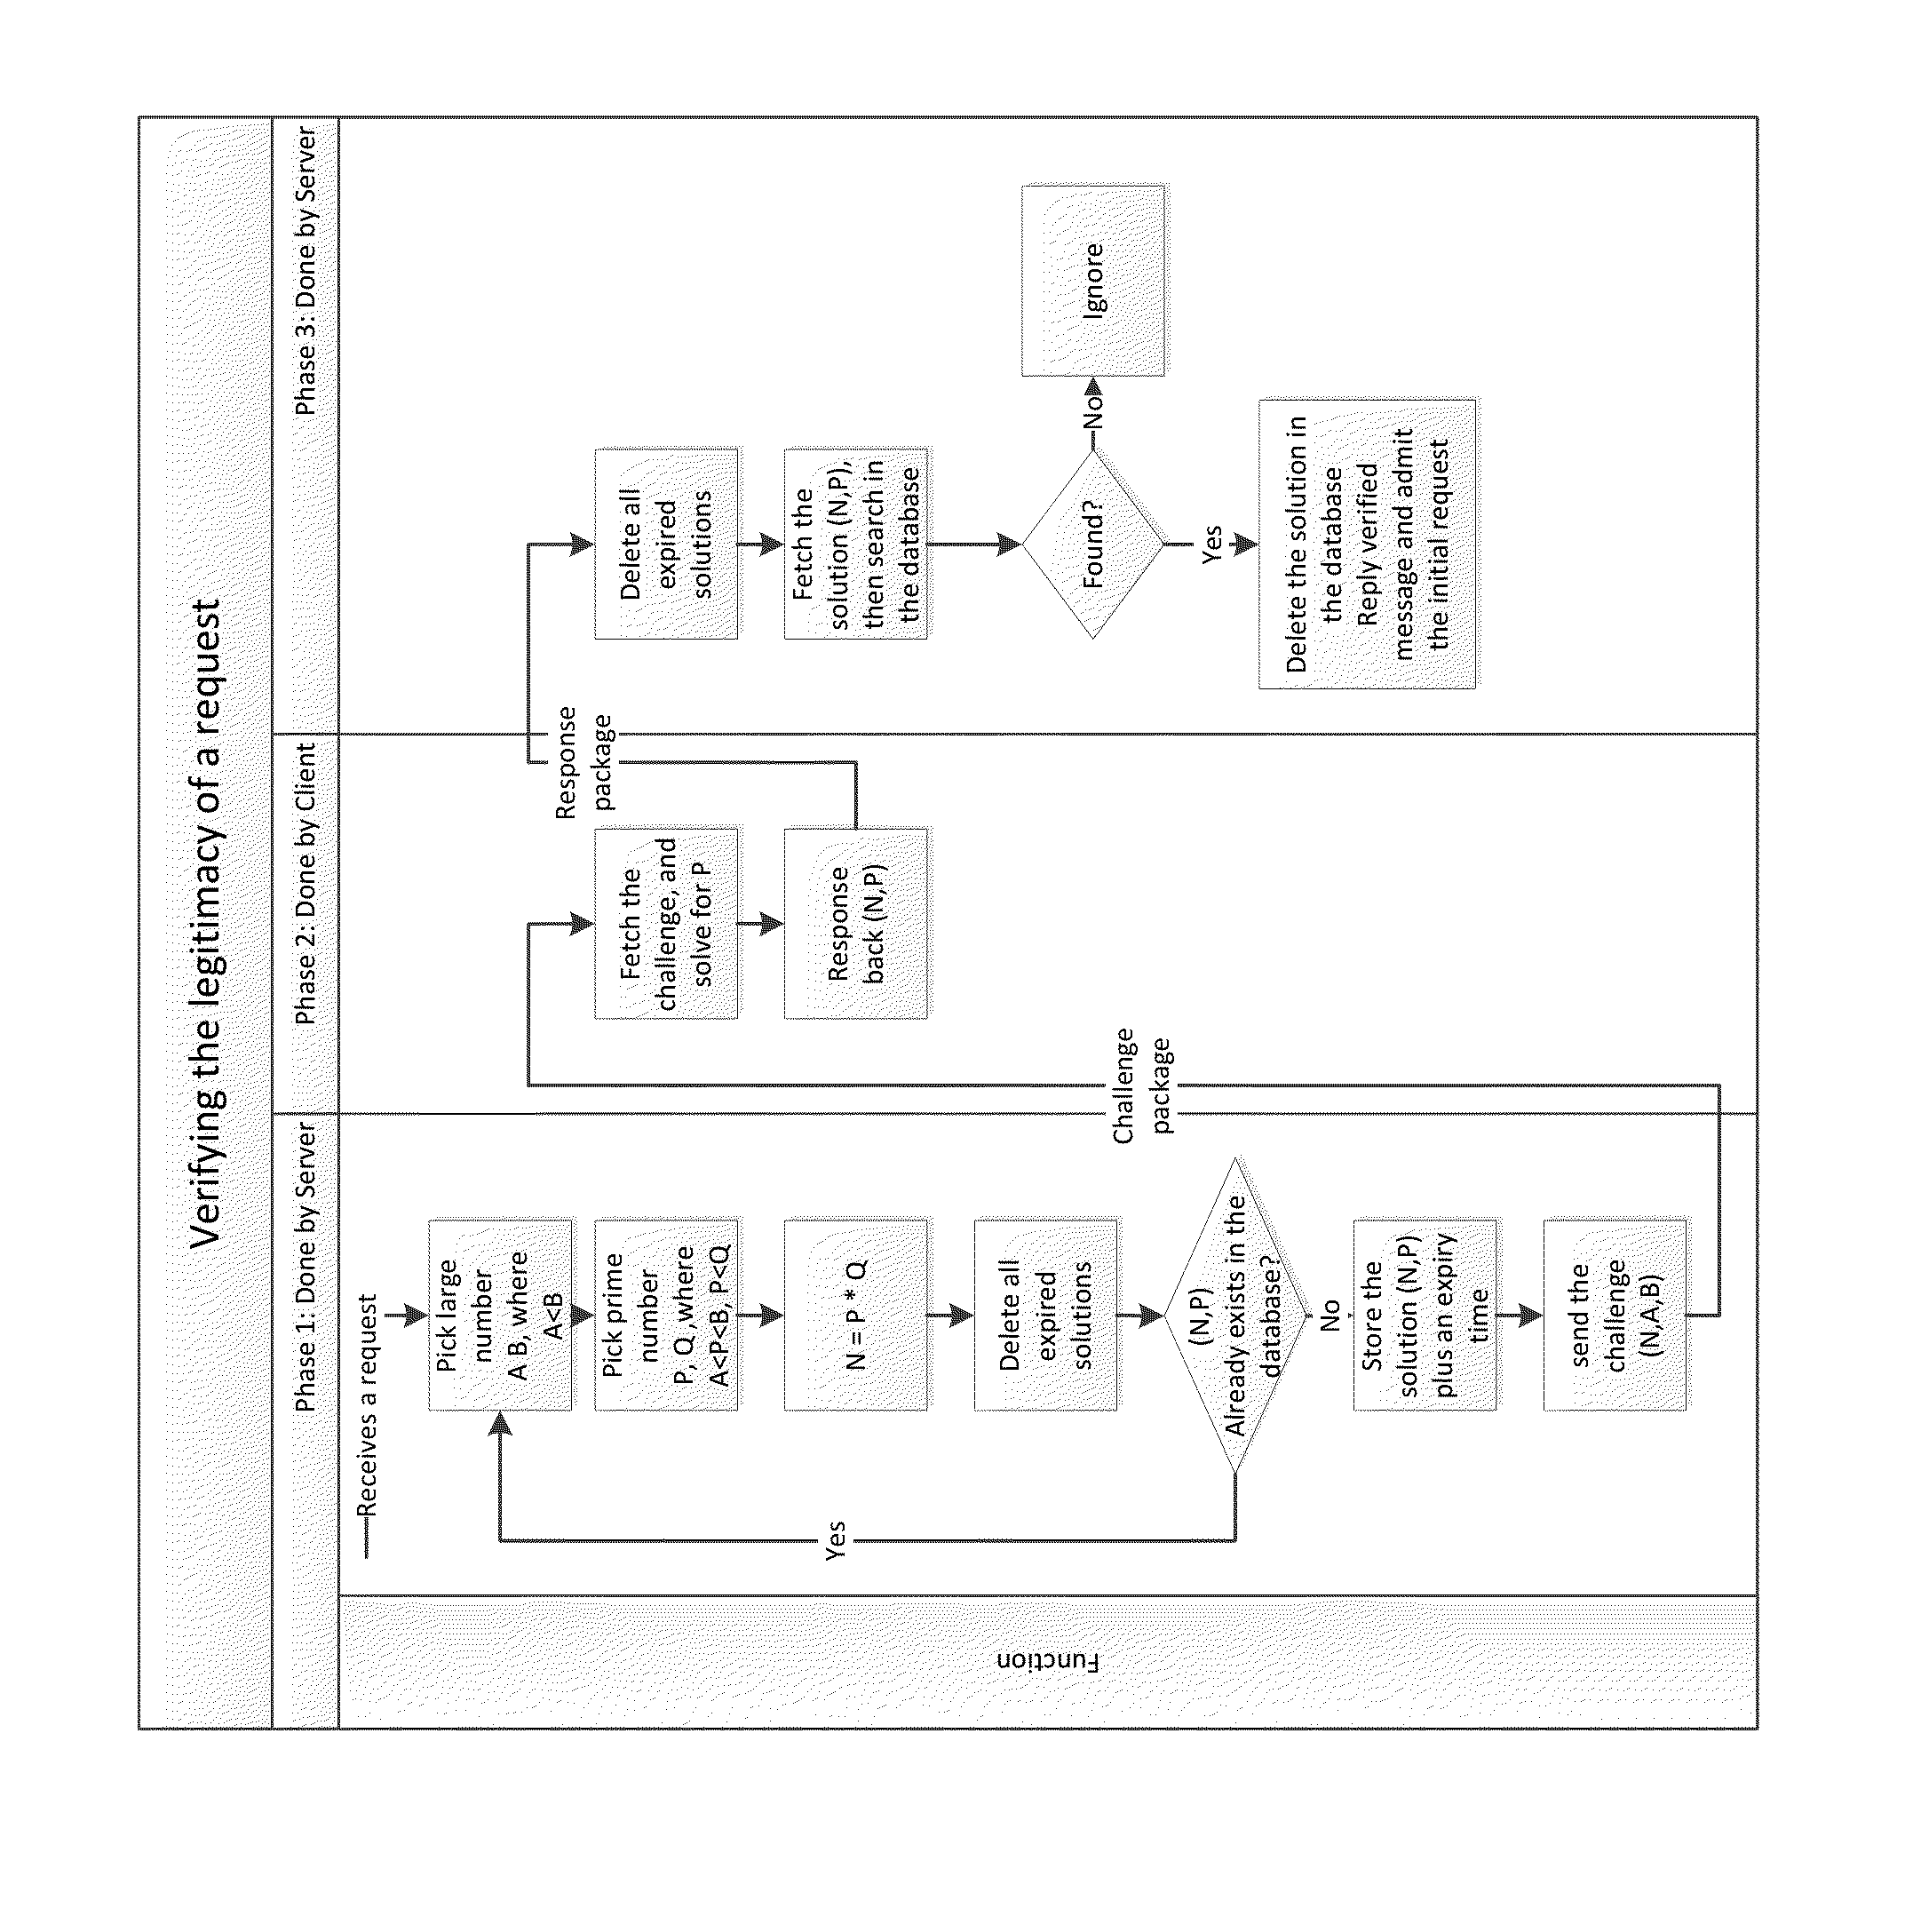 System and method for verifying the legitimacy of requests sent from clients to server